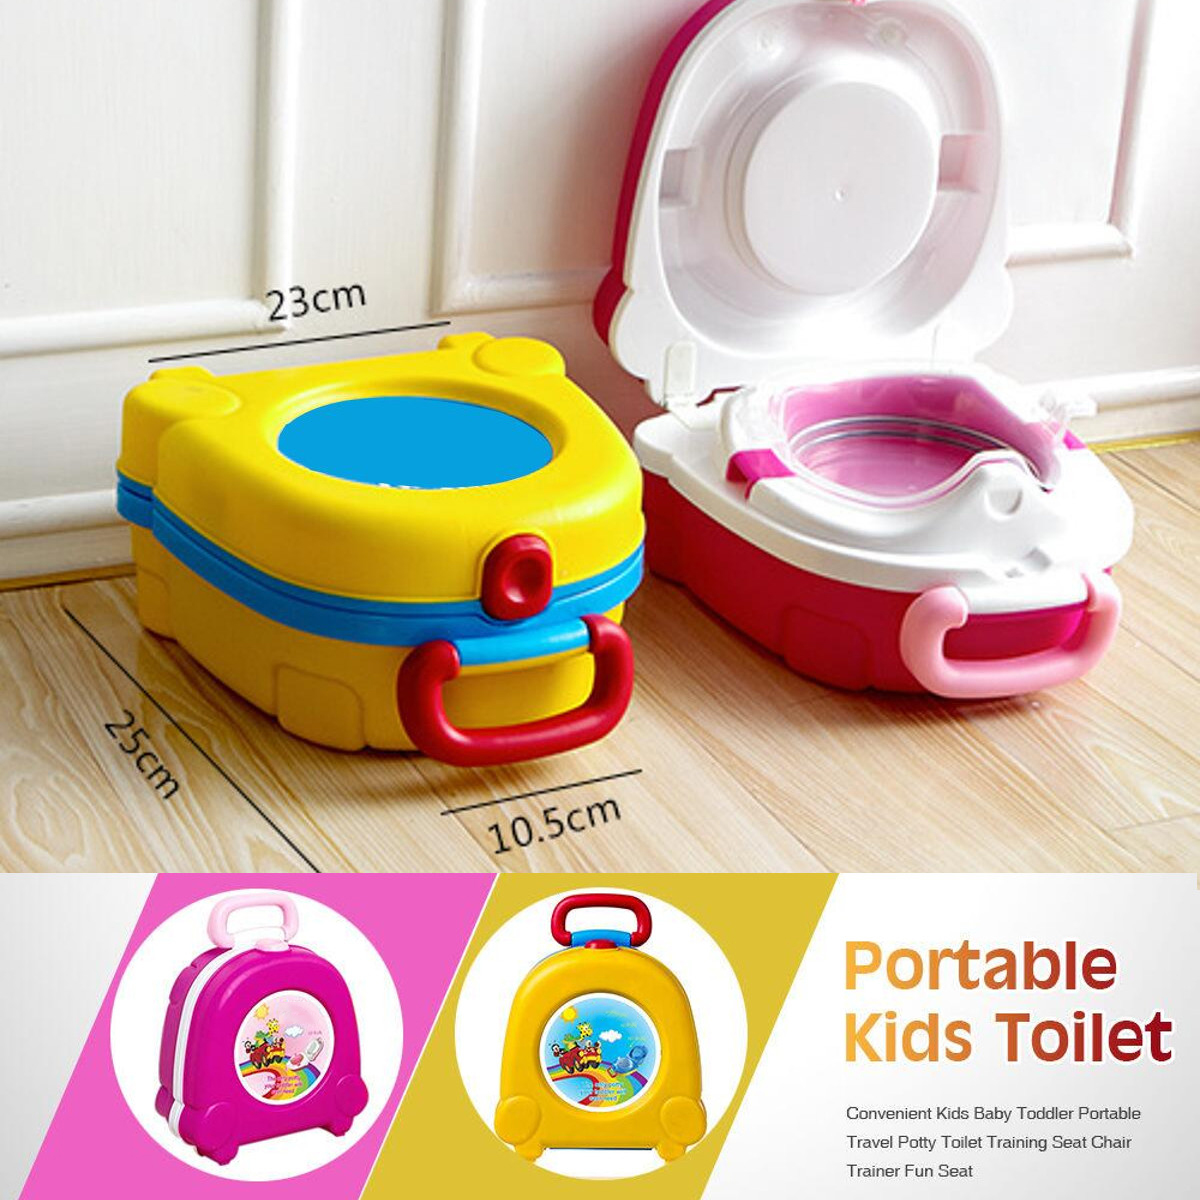 Lightweight Portable Toilet for Travel Home Car Camping Use for Kids Baby Shiker 1Pcs Portable Baby Potty Toilet for Kids Travel Folding Potty Child Training Seat